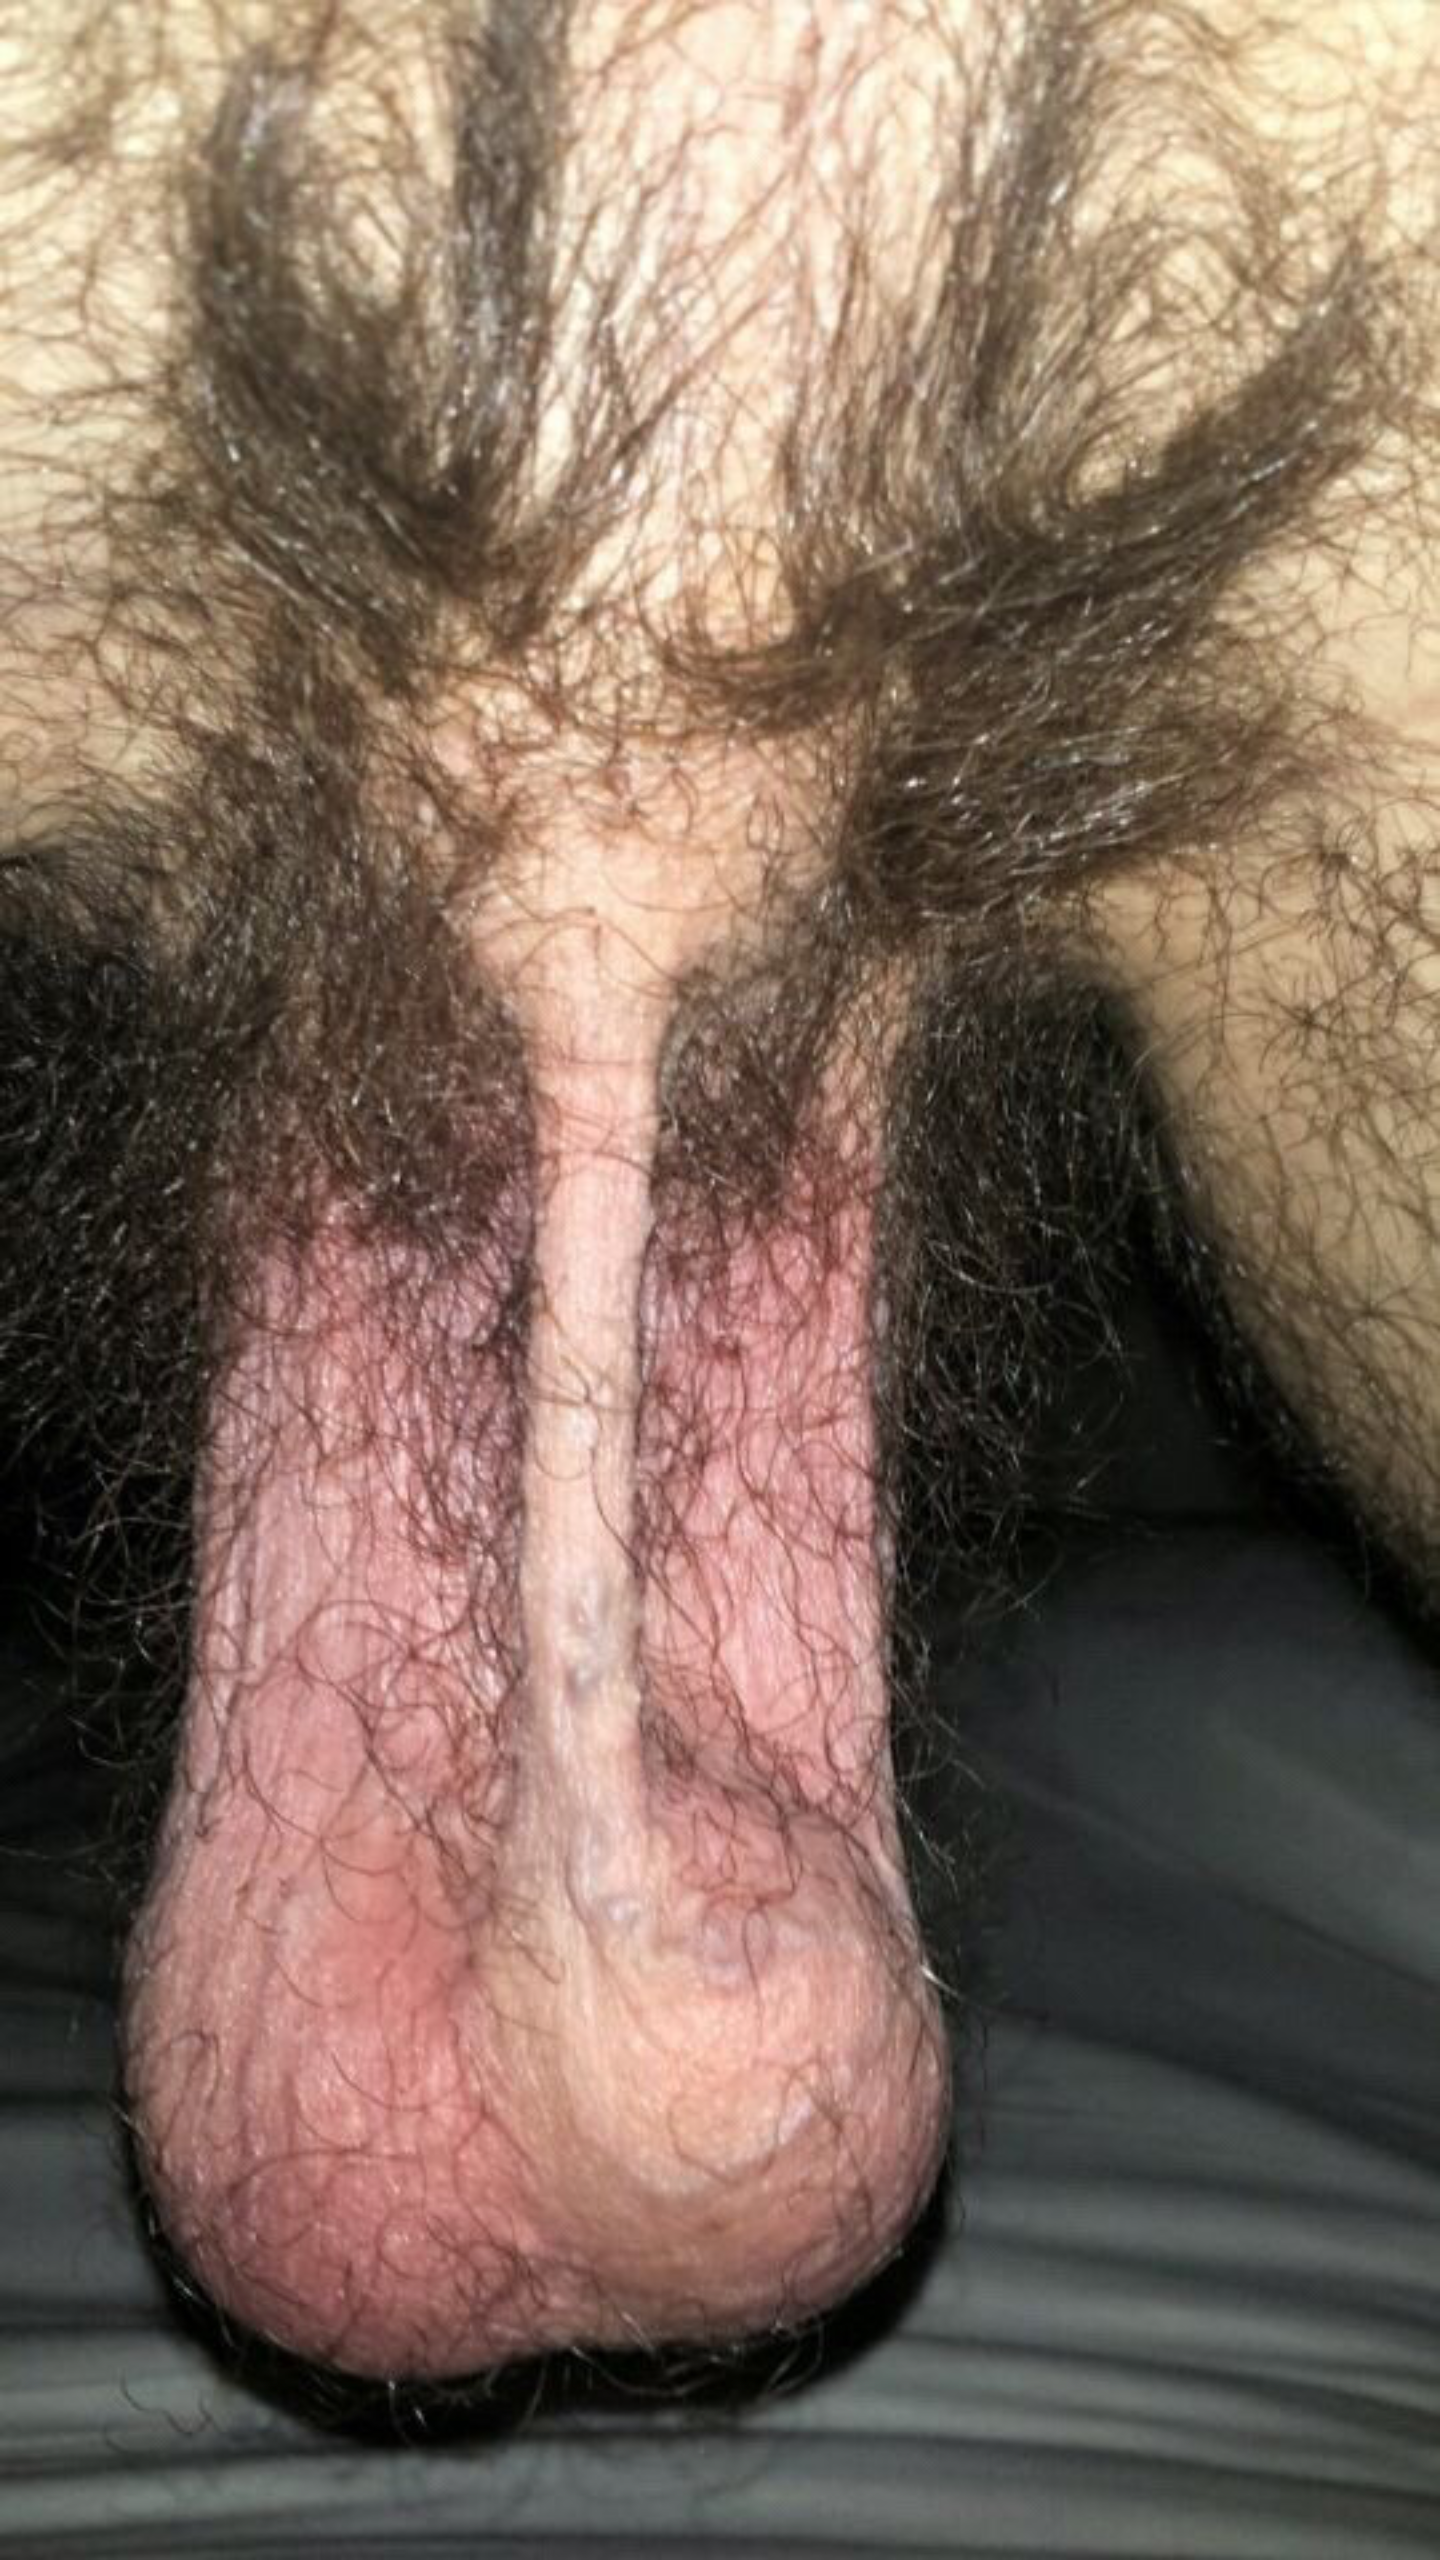 Watch the Photo by Smitty with the username @Resol702, posted on October 15, 2019. The post is about the topic Hairy ballsack.